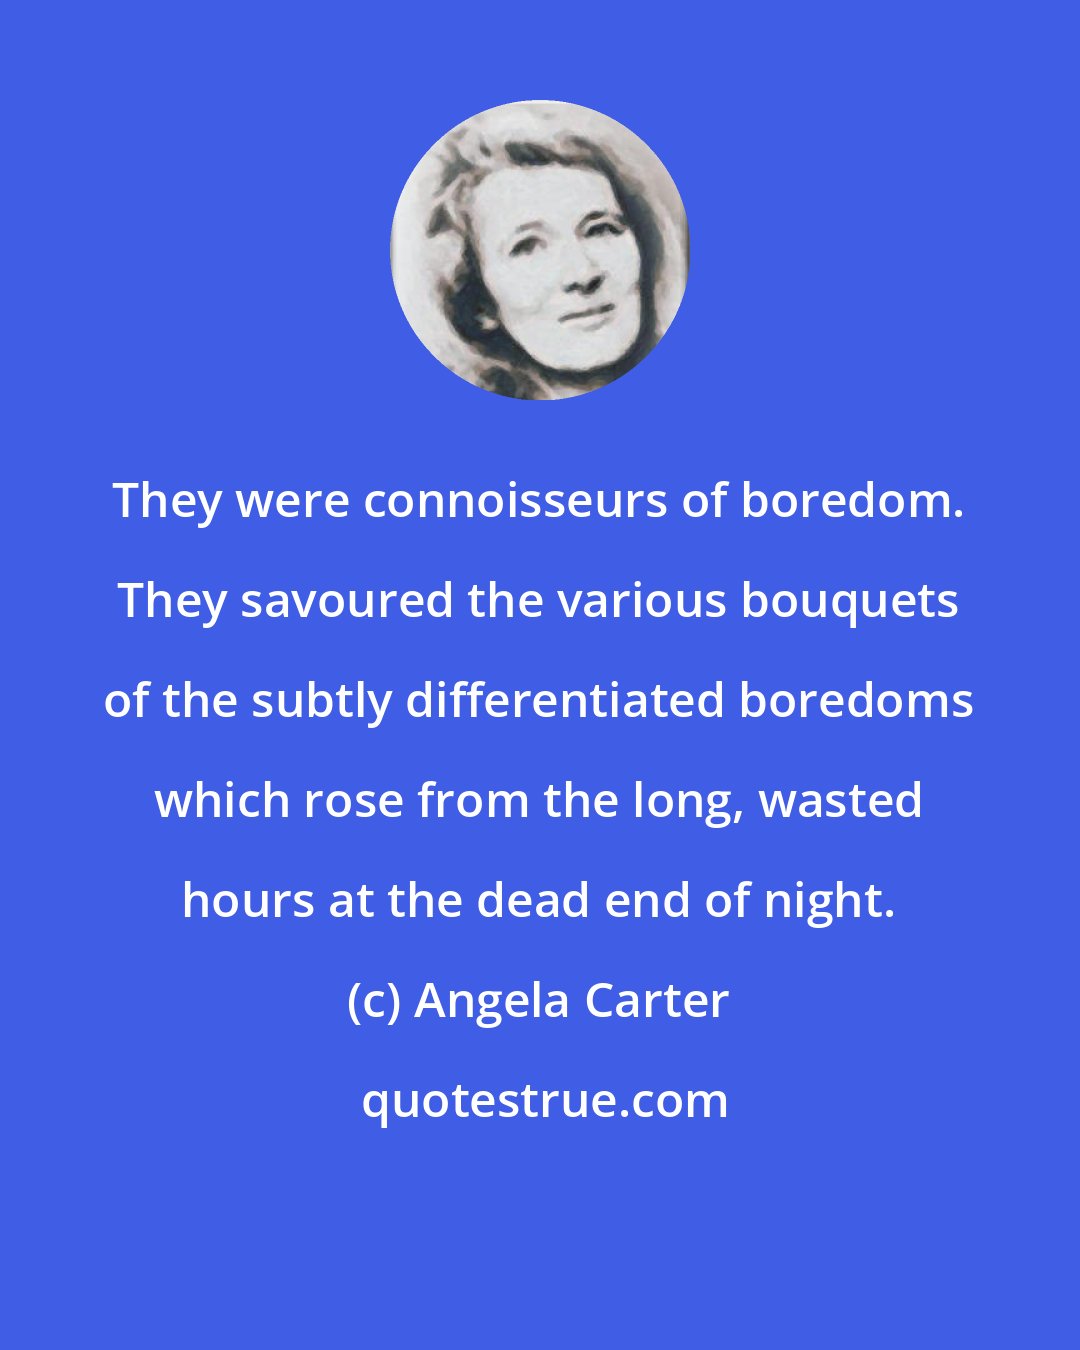 Angela Carter: They were connoisseurs of boredom. They savoured the various bouquets of the subtly differentiated boredoms which rose from the long, wasted hours at the dead end of night.